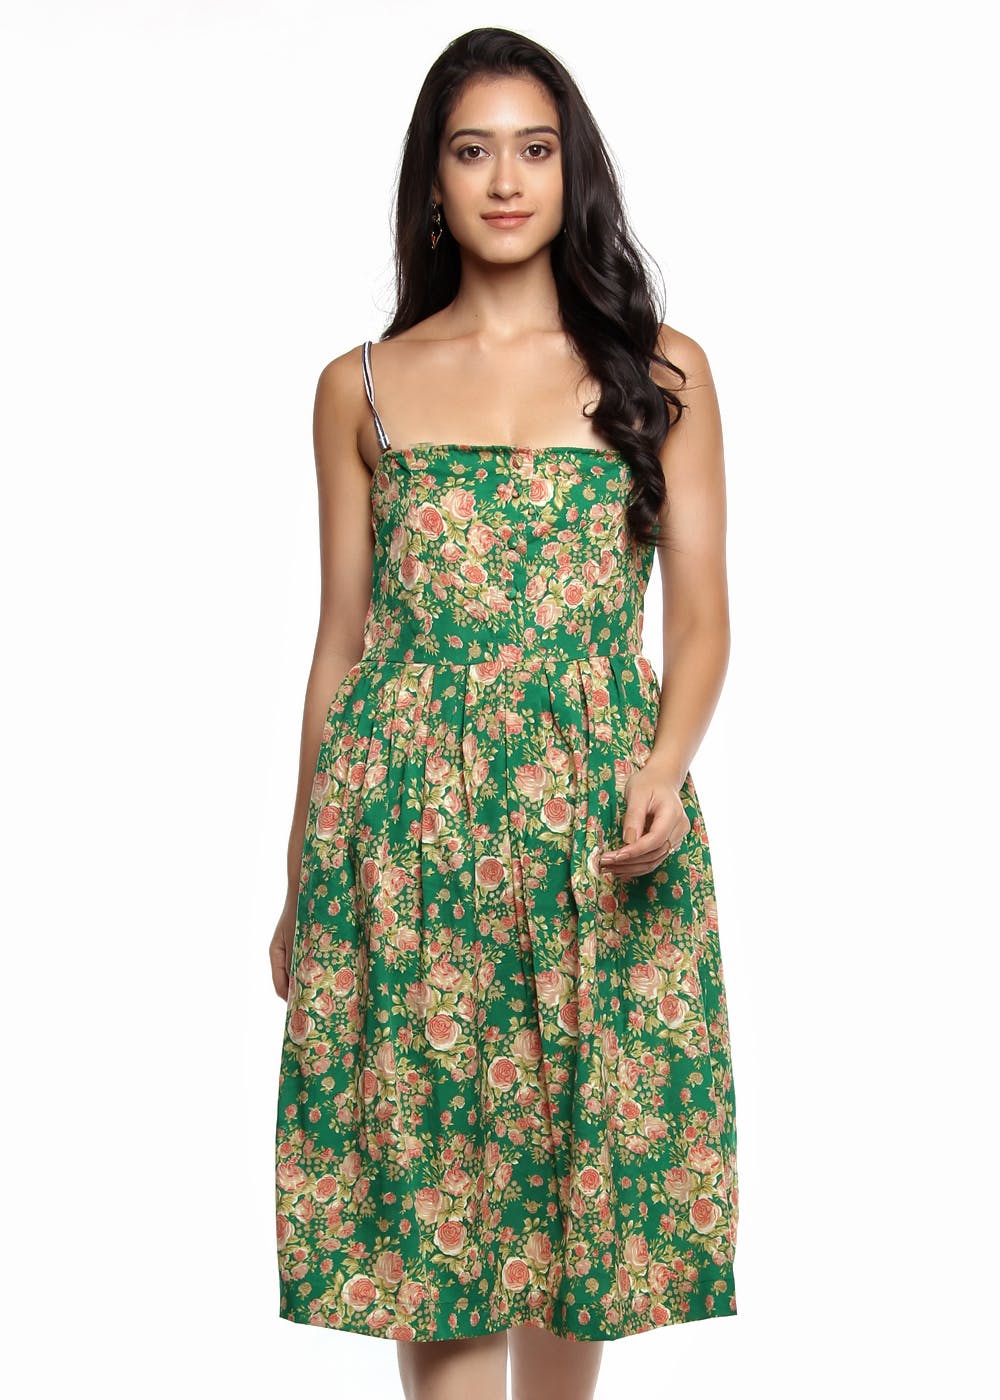 Get Green Floral Printed Pleated Yoke Detail Empire Dress at ₹ 1600 ...